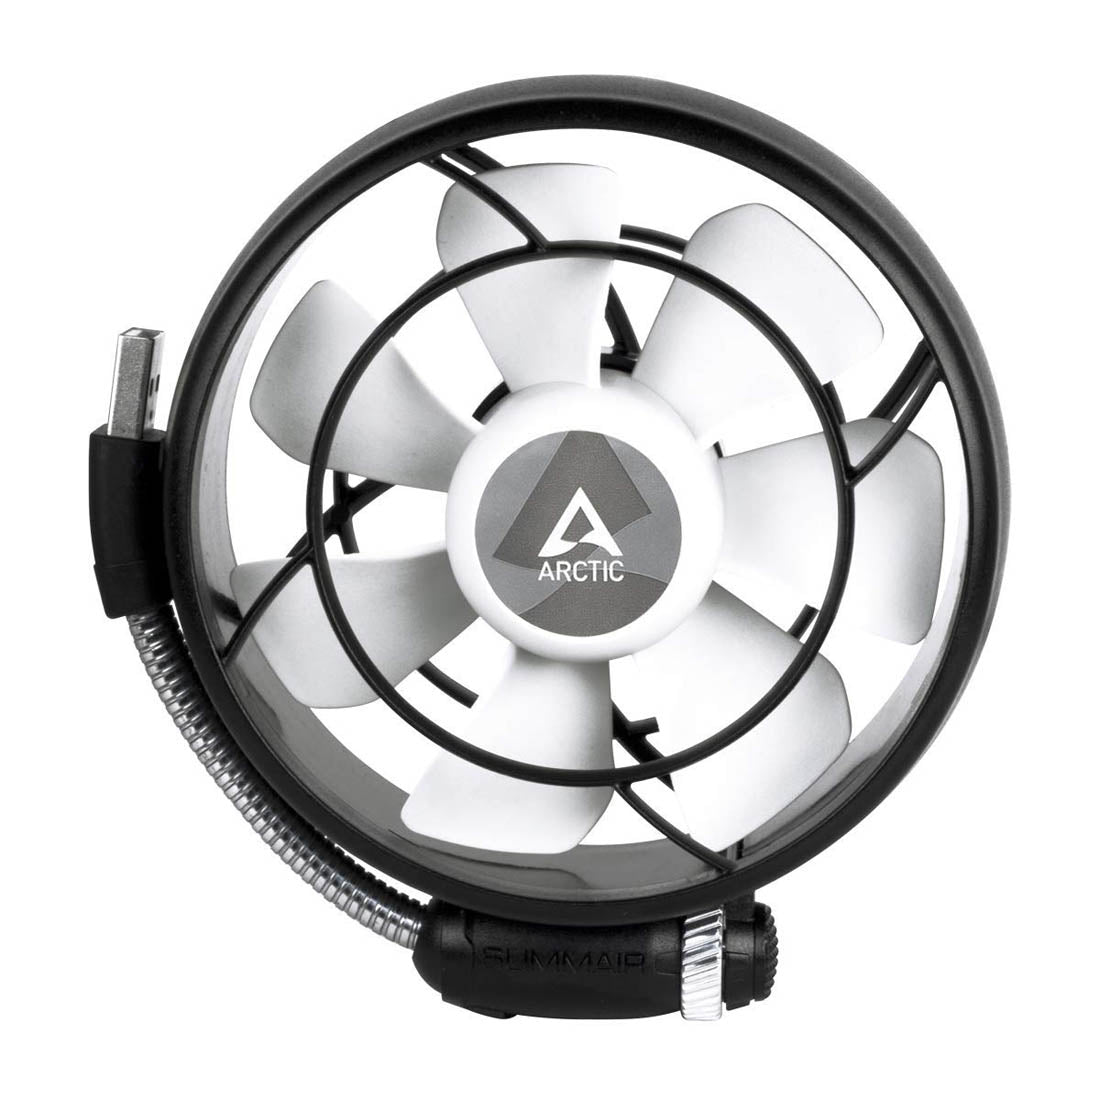 ARCTIC Summair Light Portable USB Fan for Office and Laptop